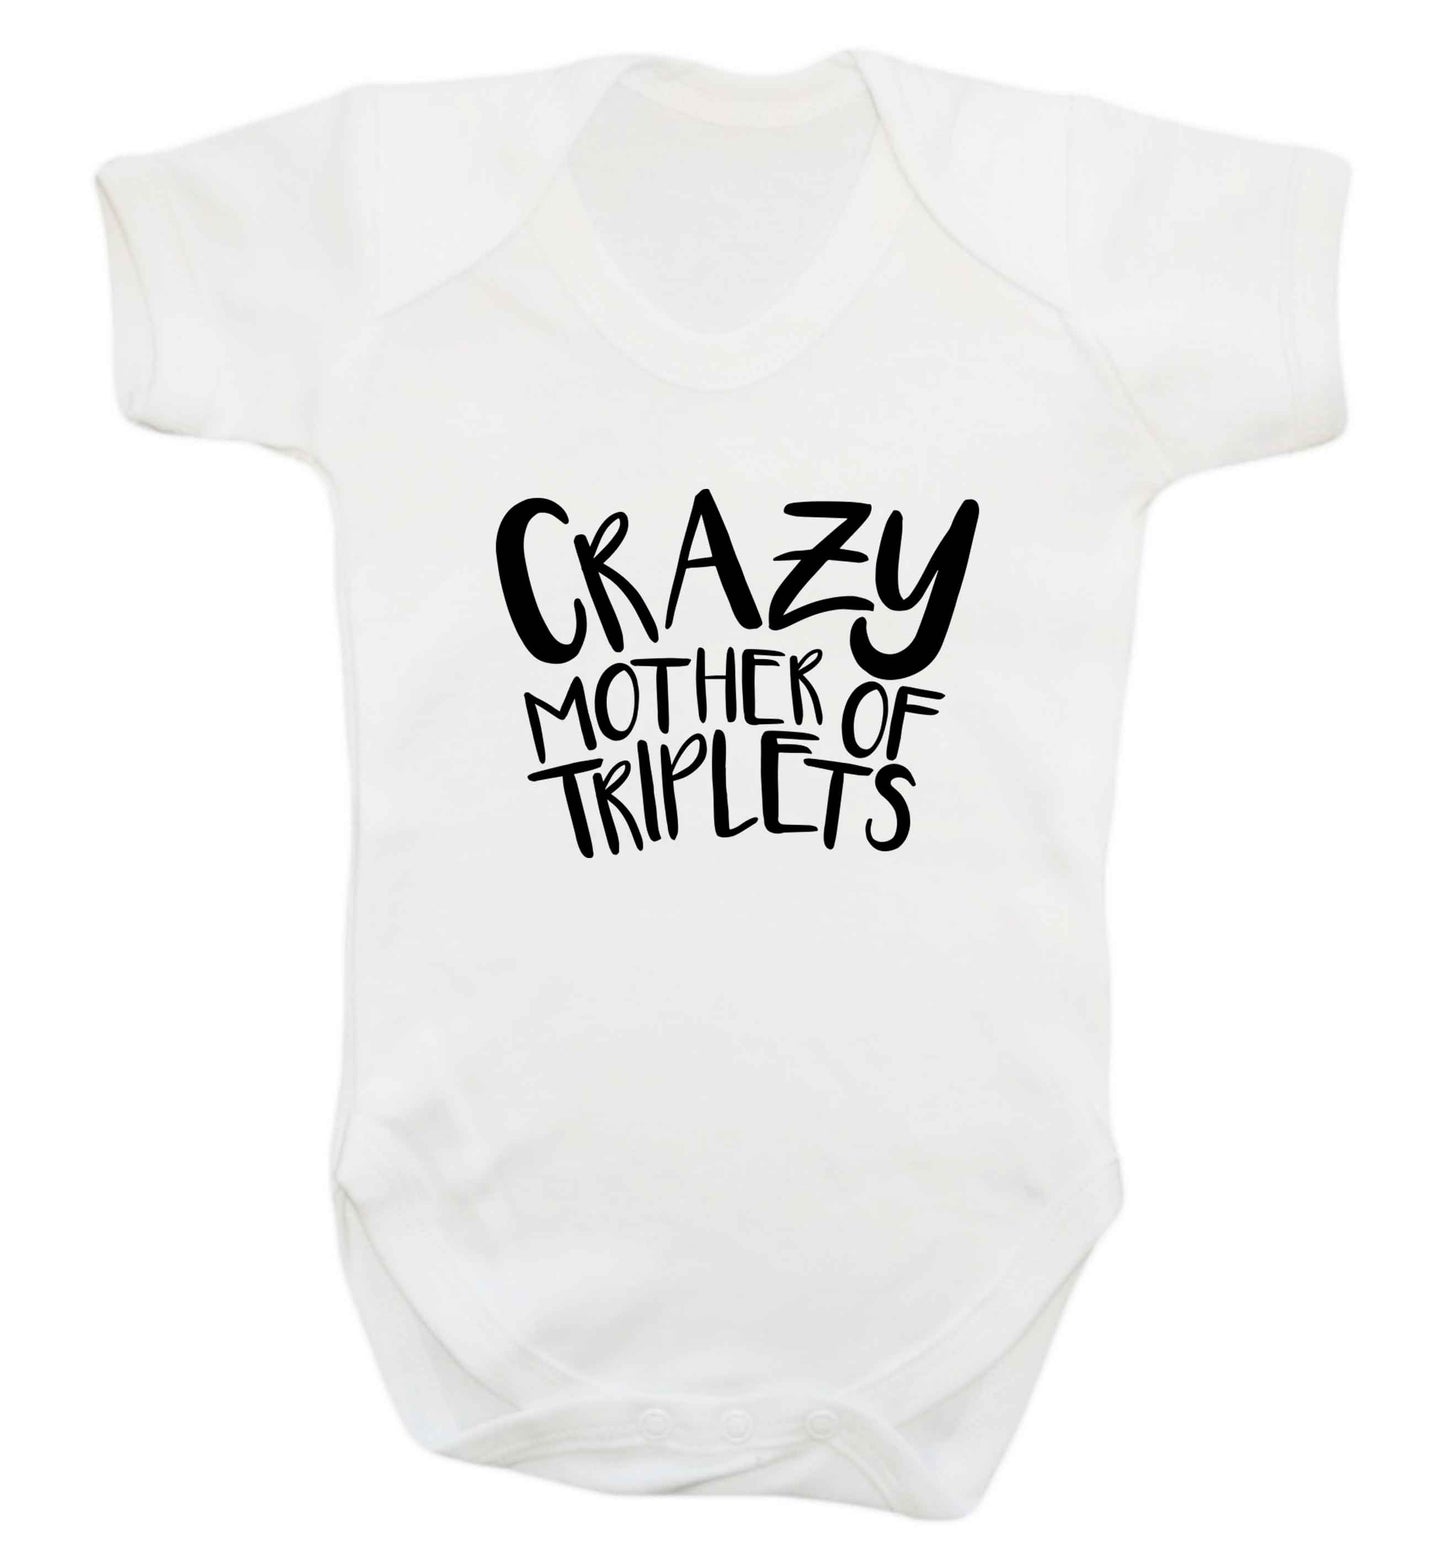 Crazy mother of triplets baby vest white 18-24 months